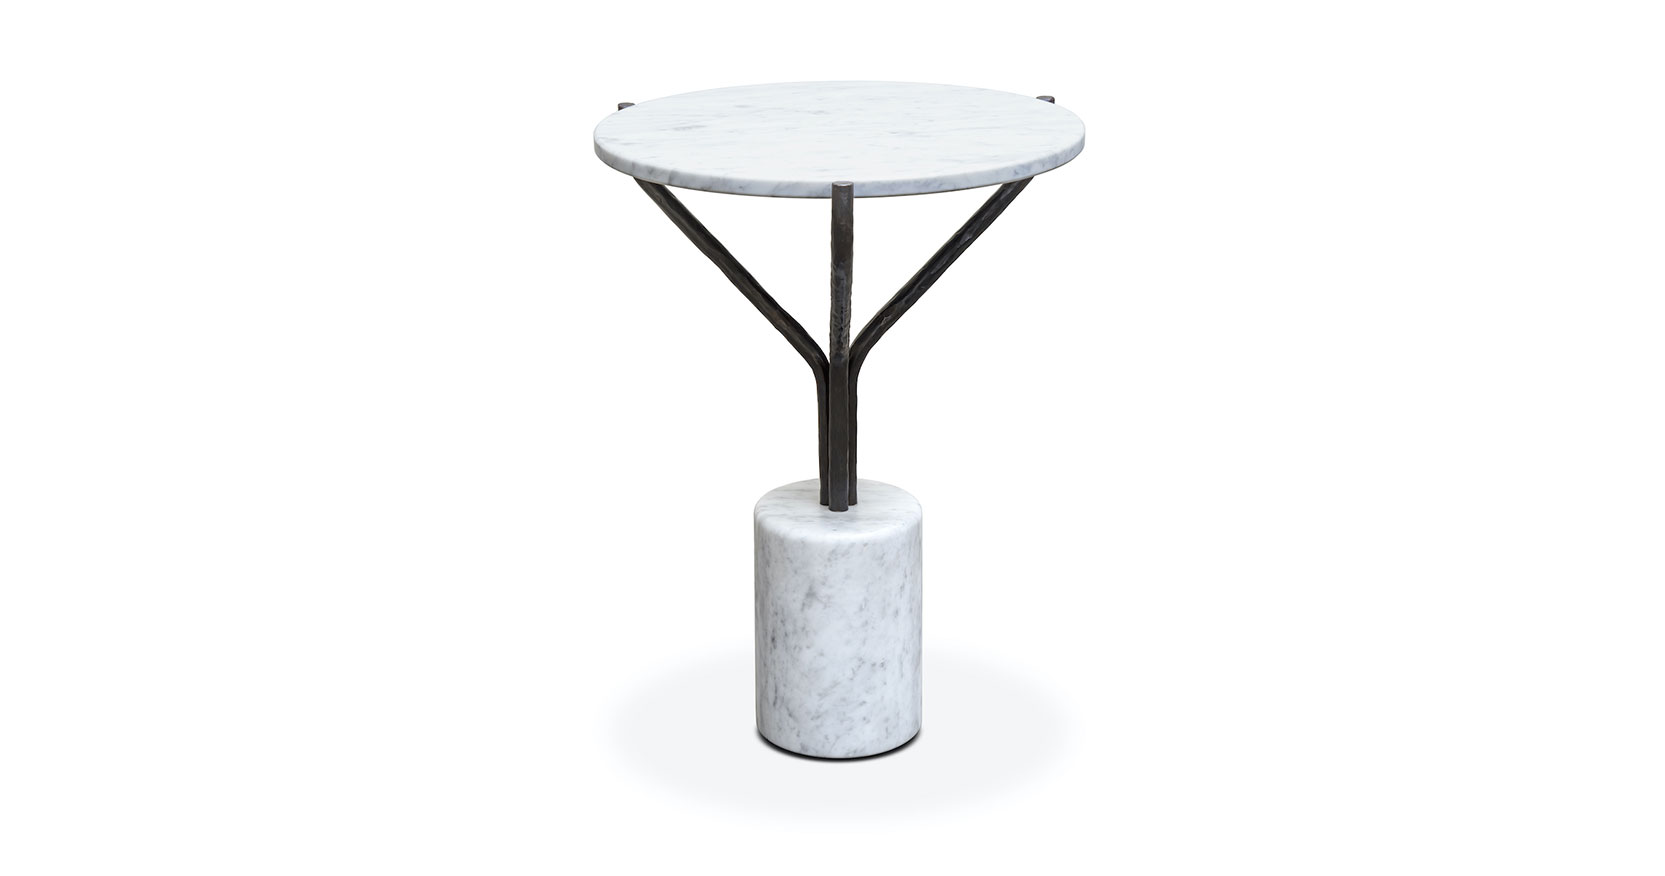 Philippine Lemaire, small round table, white marble top supported by a black wrought iron foot that separates into 3 rods that fits into a cylindrical white marble base